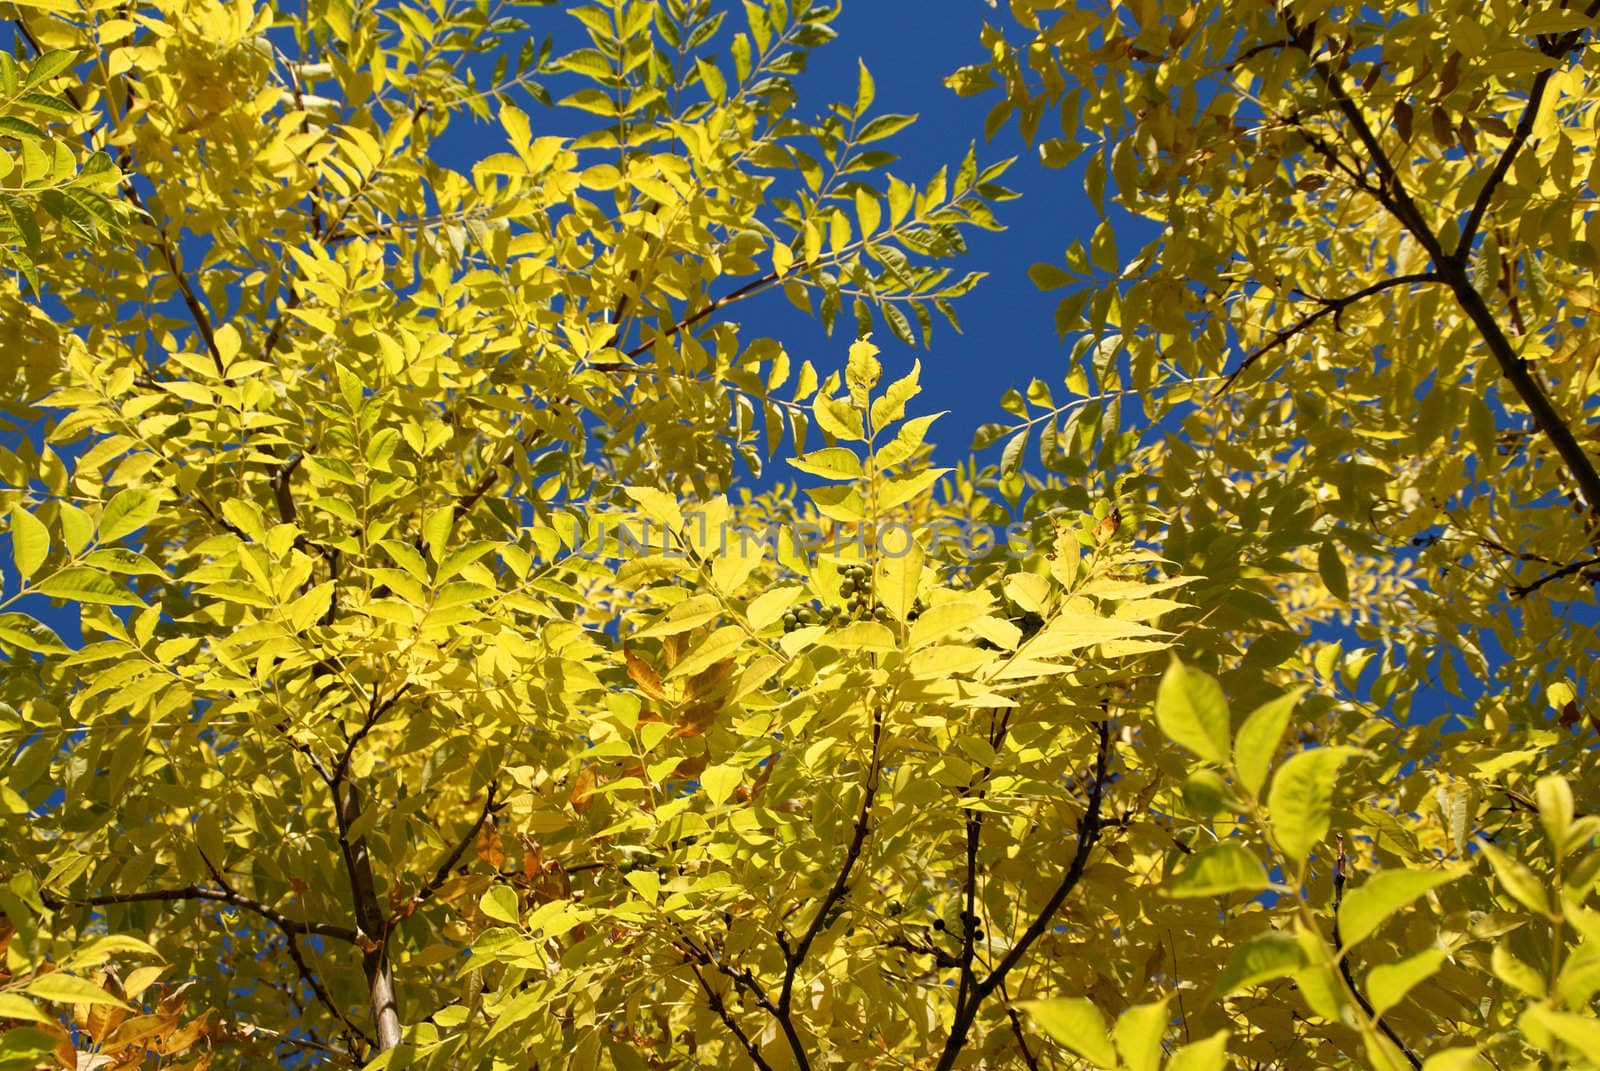 A view towards the yellow foliage of Phellodendron amurense and the blue sky in autumn.